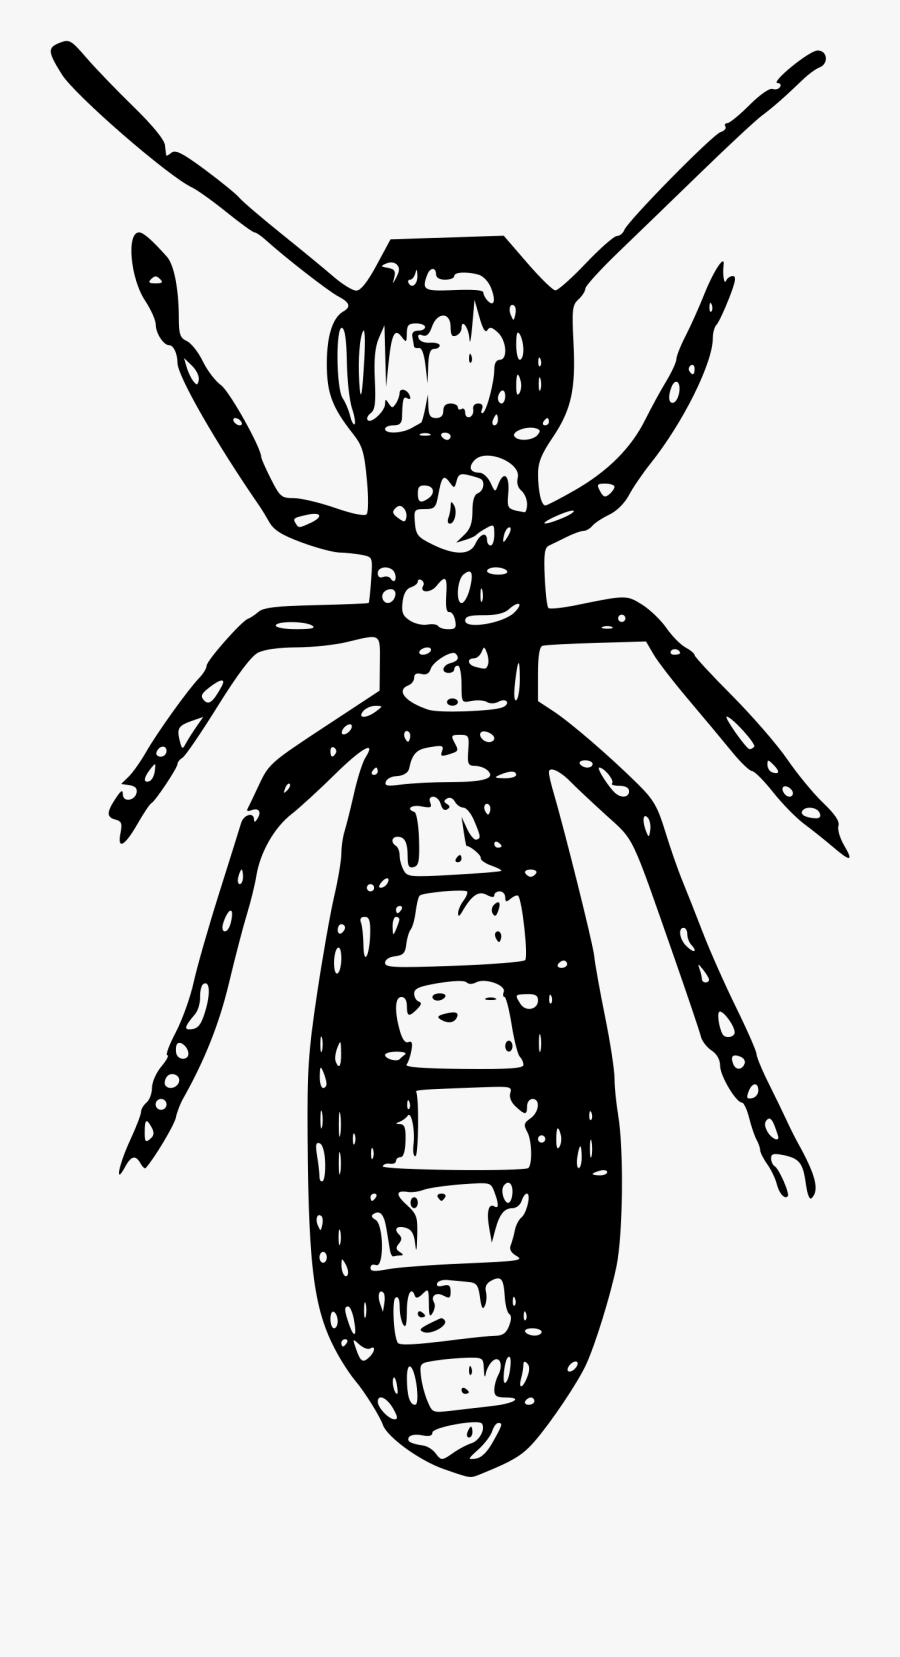 Termite Background Png - Termite Black And White, Transparent Clipart